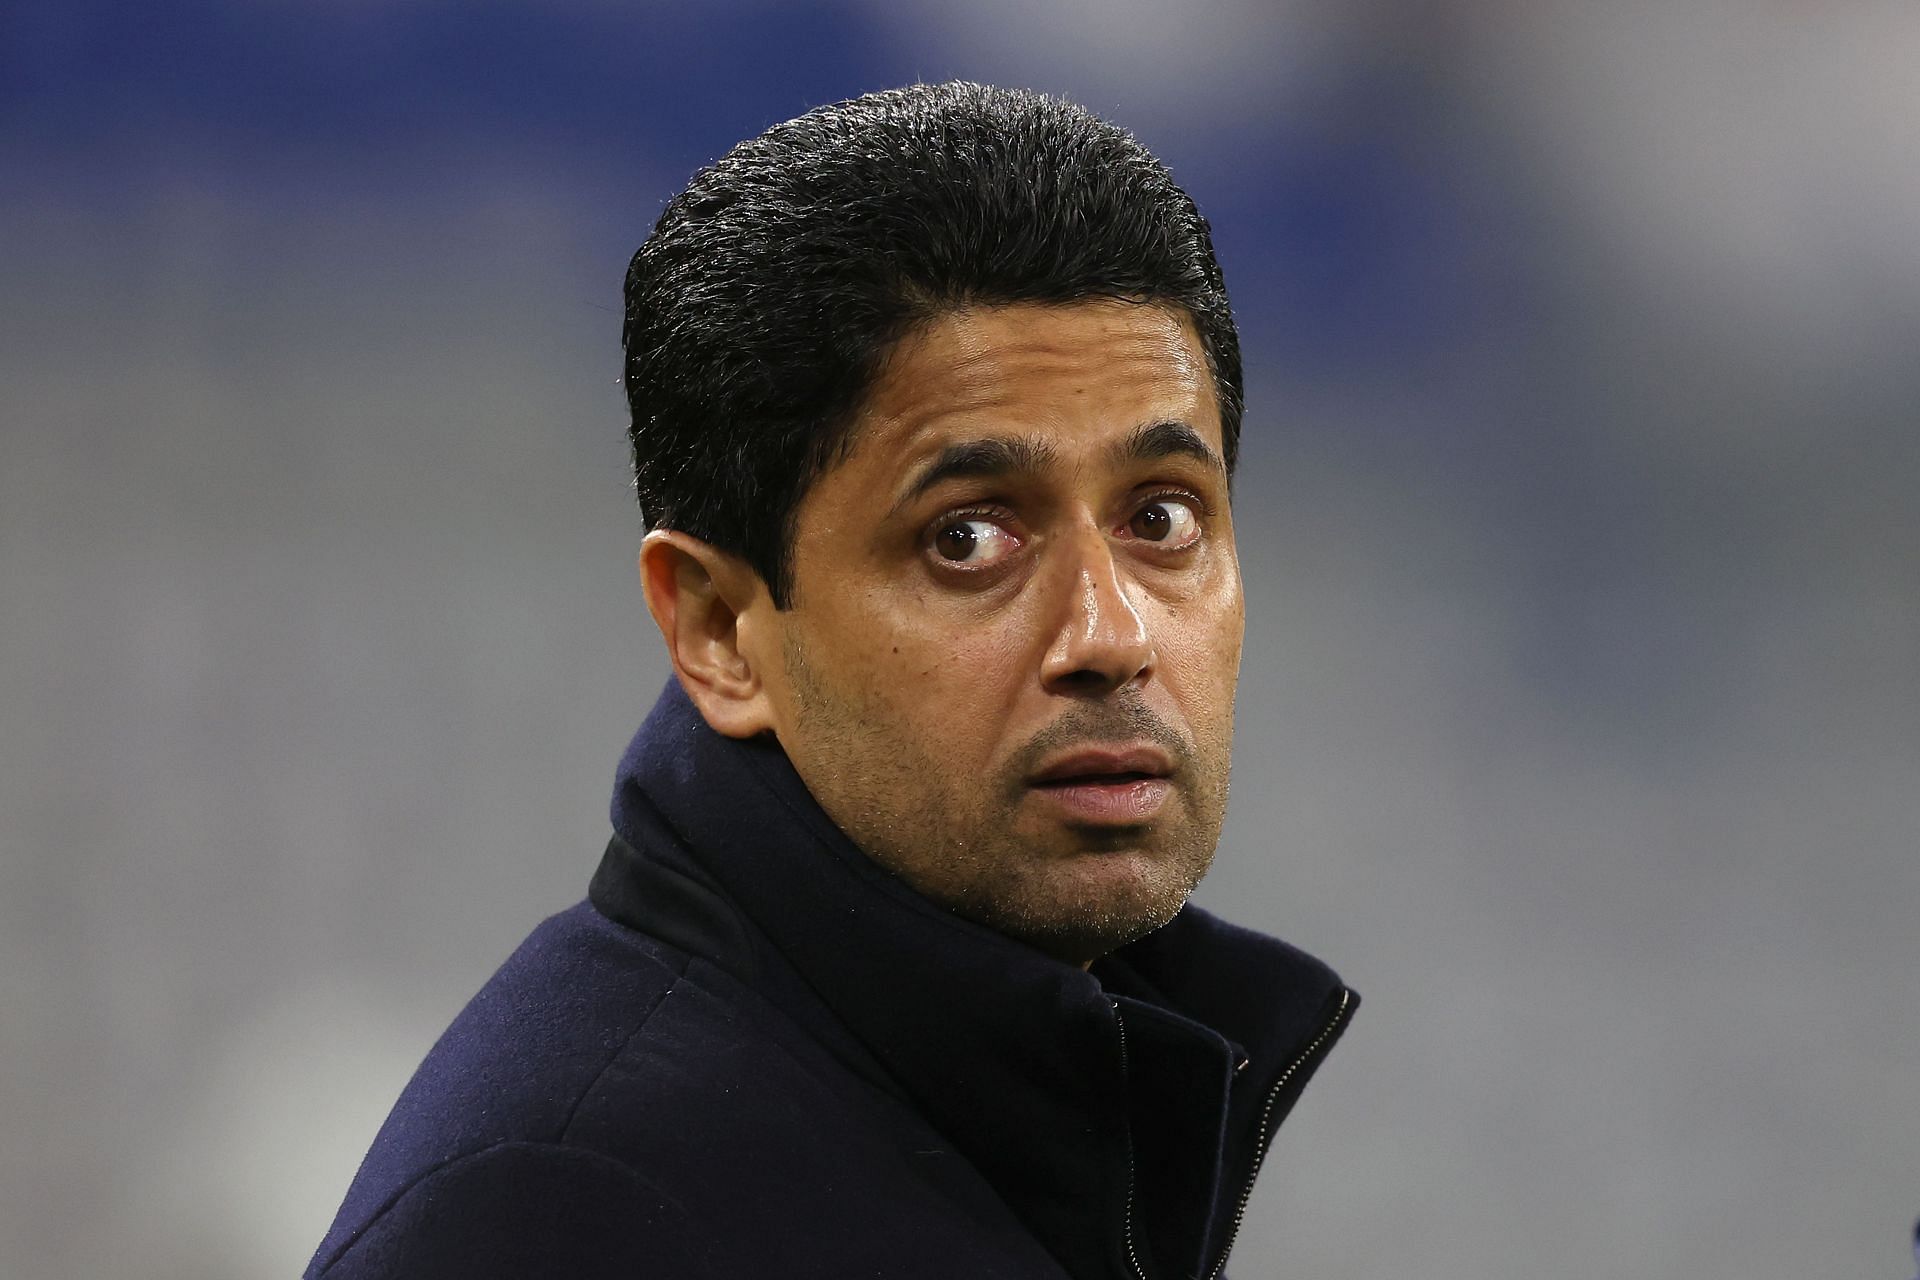 Nasser Al-Khelaifi labeled Kylian Mbappe as the best player in the world.